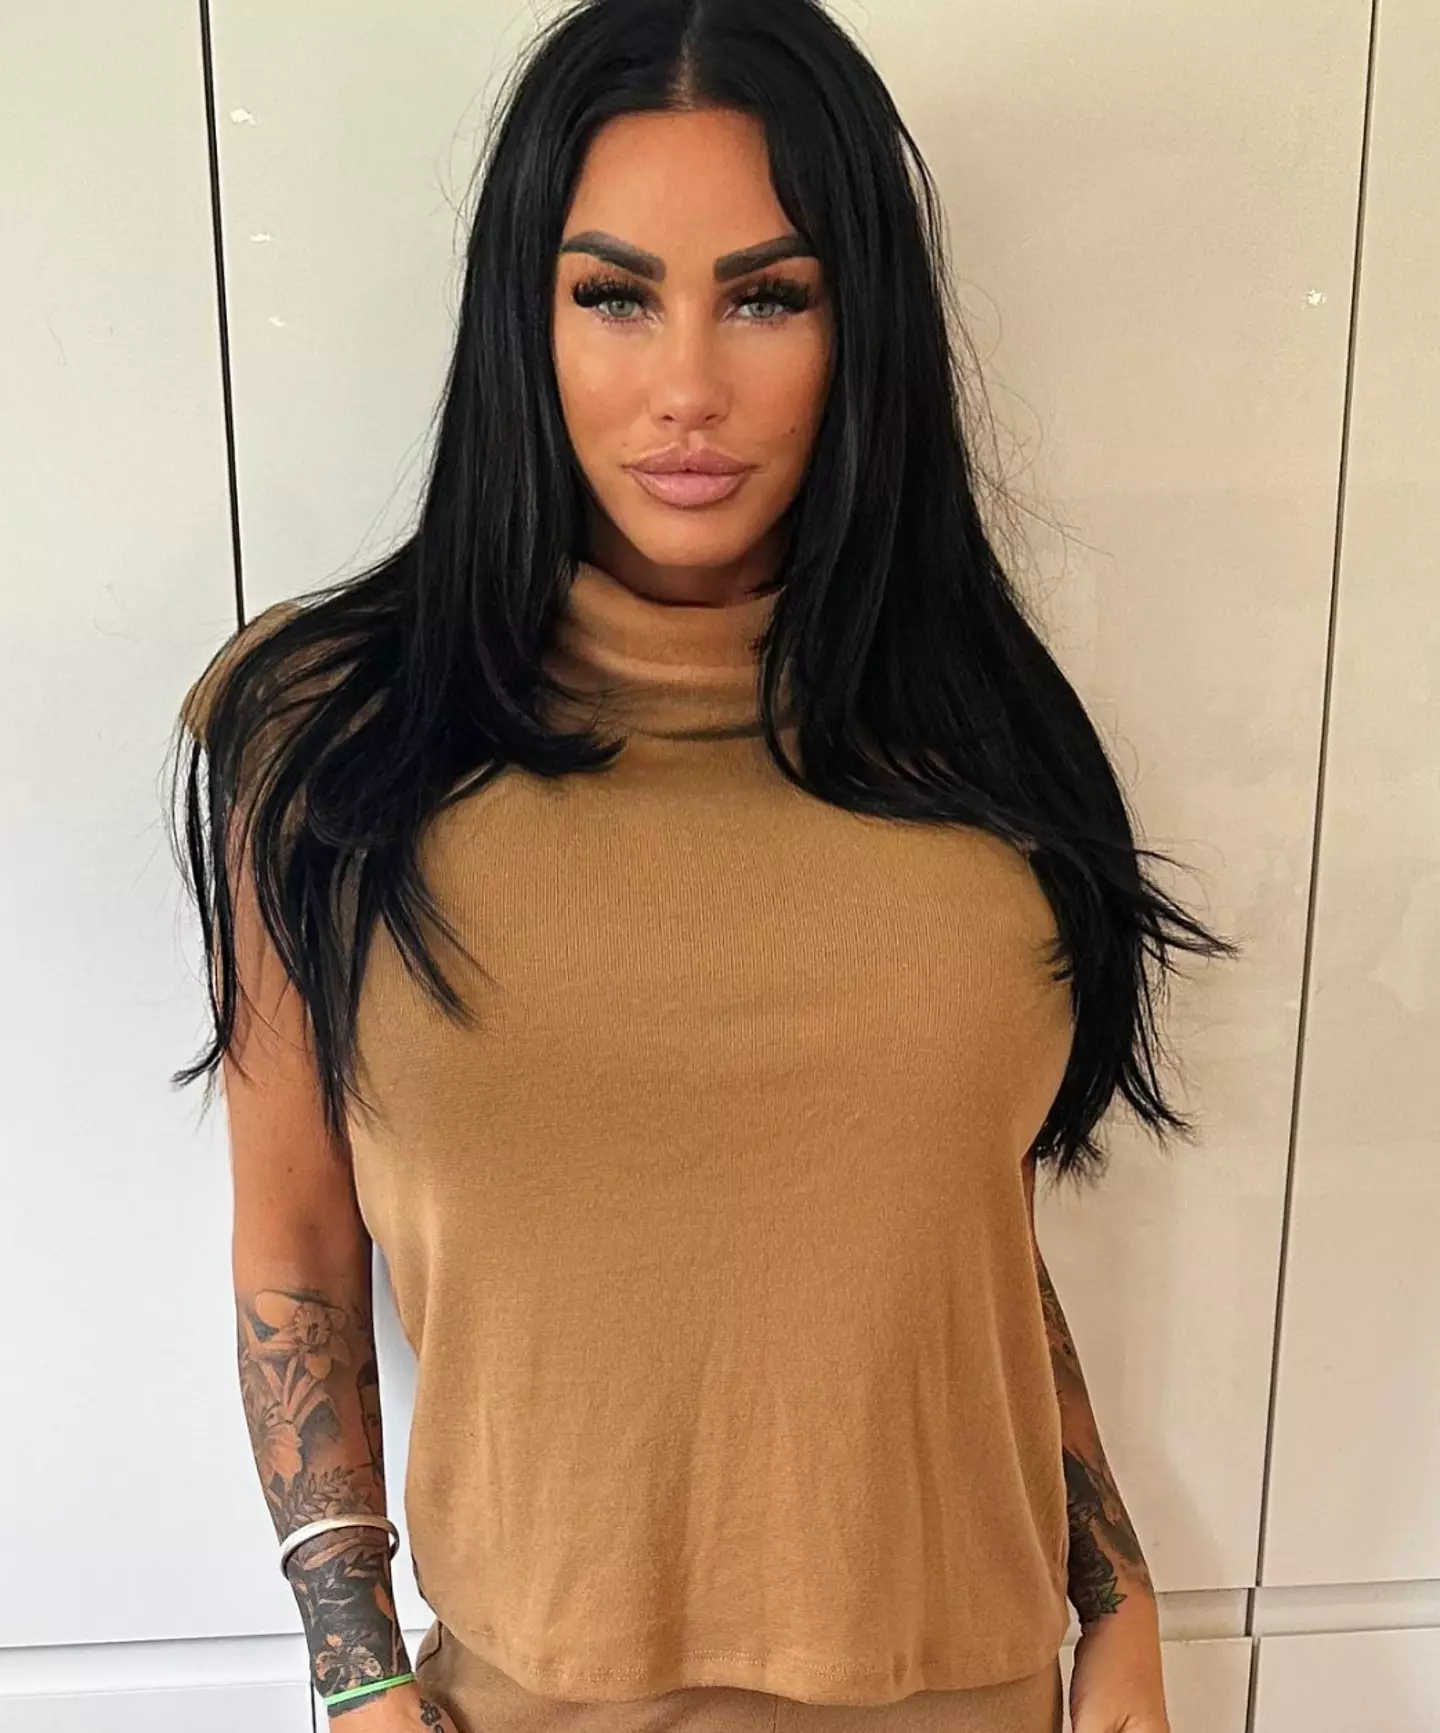 Katie Price discussed the rumoured lineup on her podcast.